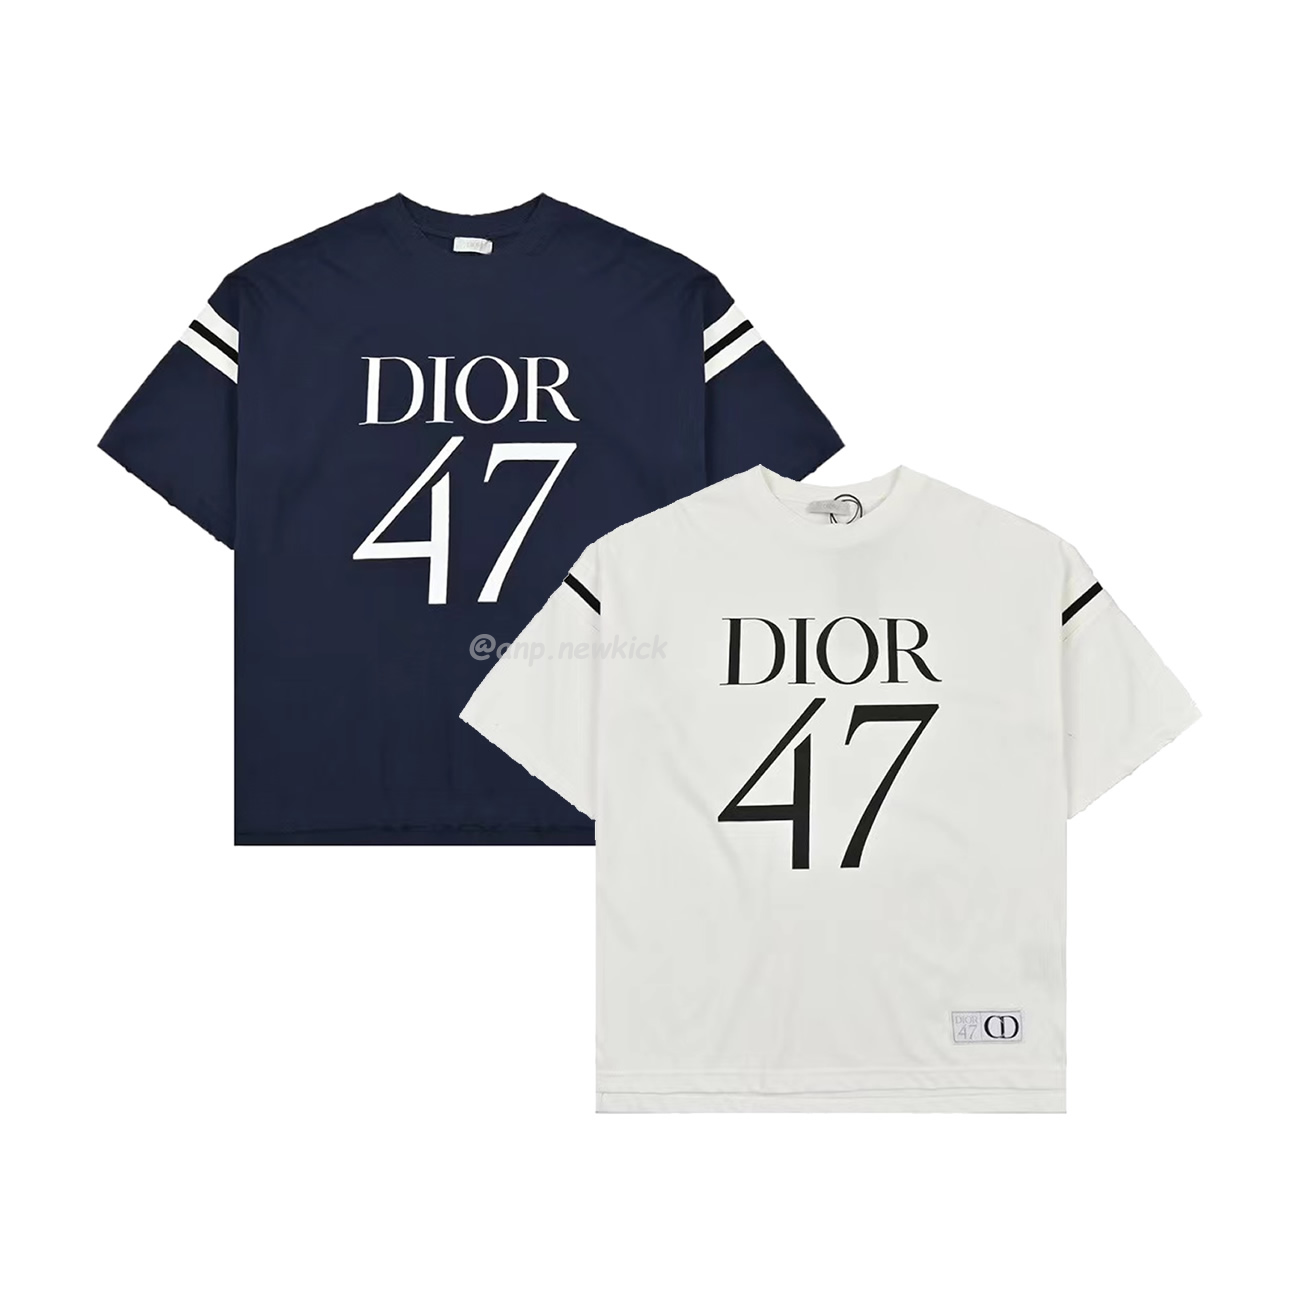 Dior Wide Body Bamboo Pure Cotton Plain Weave Fabric T Shirt White Navy (1) - newkick.org